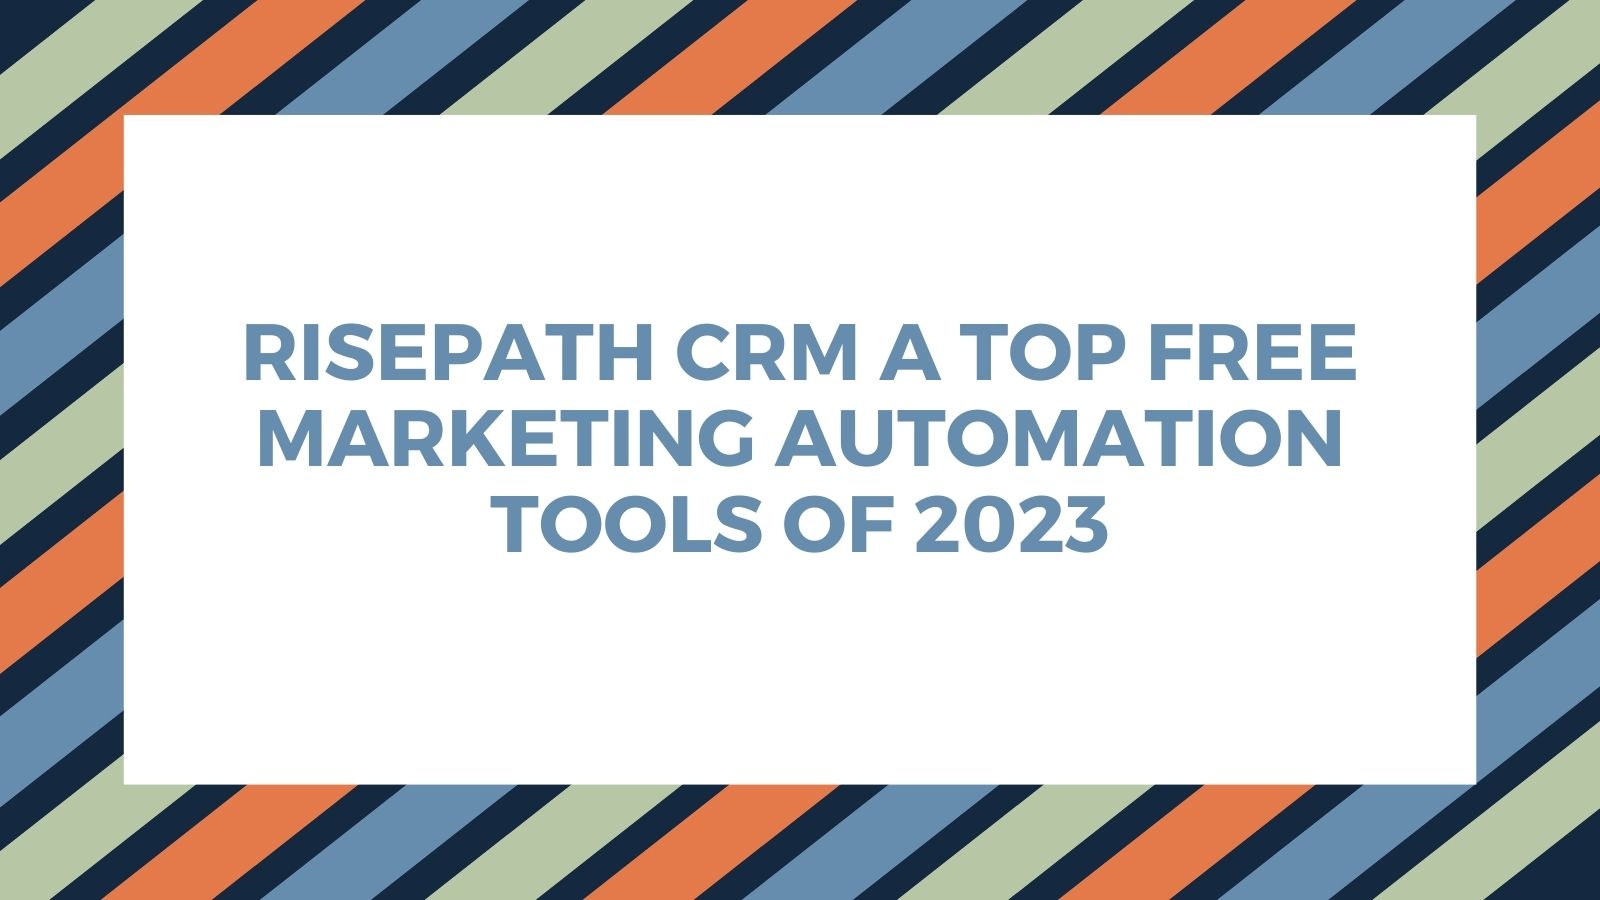 RisePath CRM A top free marketing automation tool of 2023